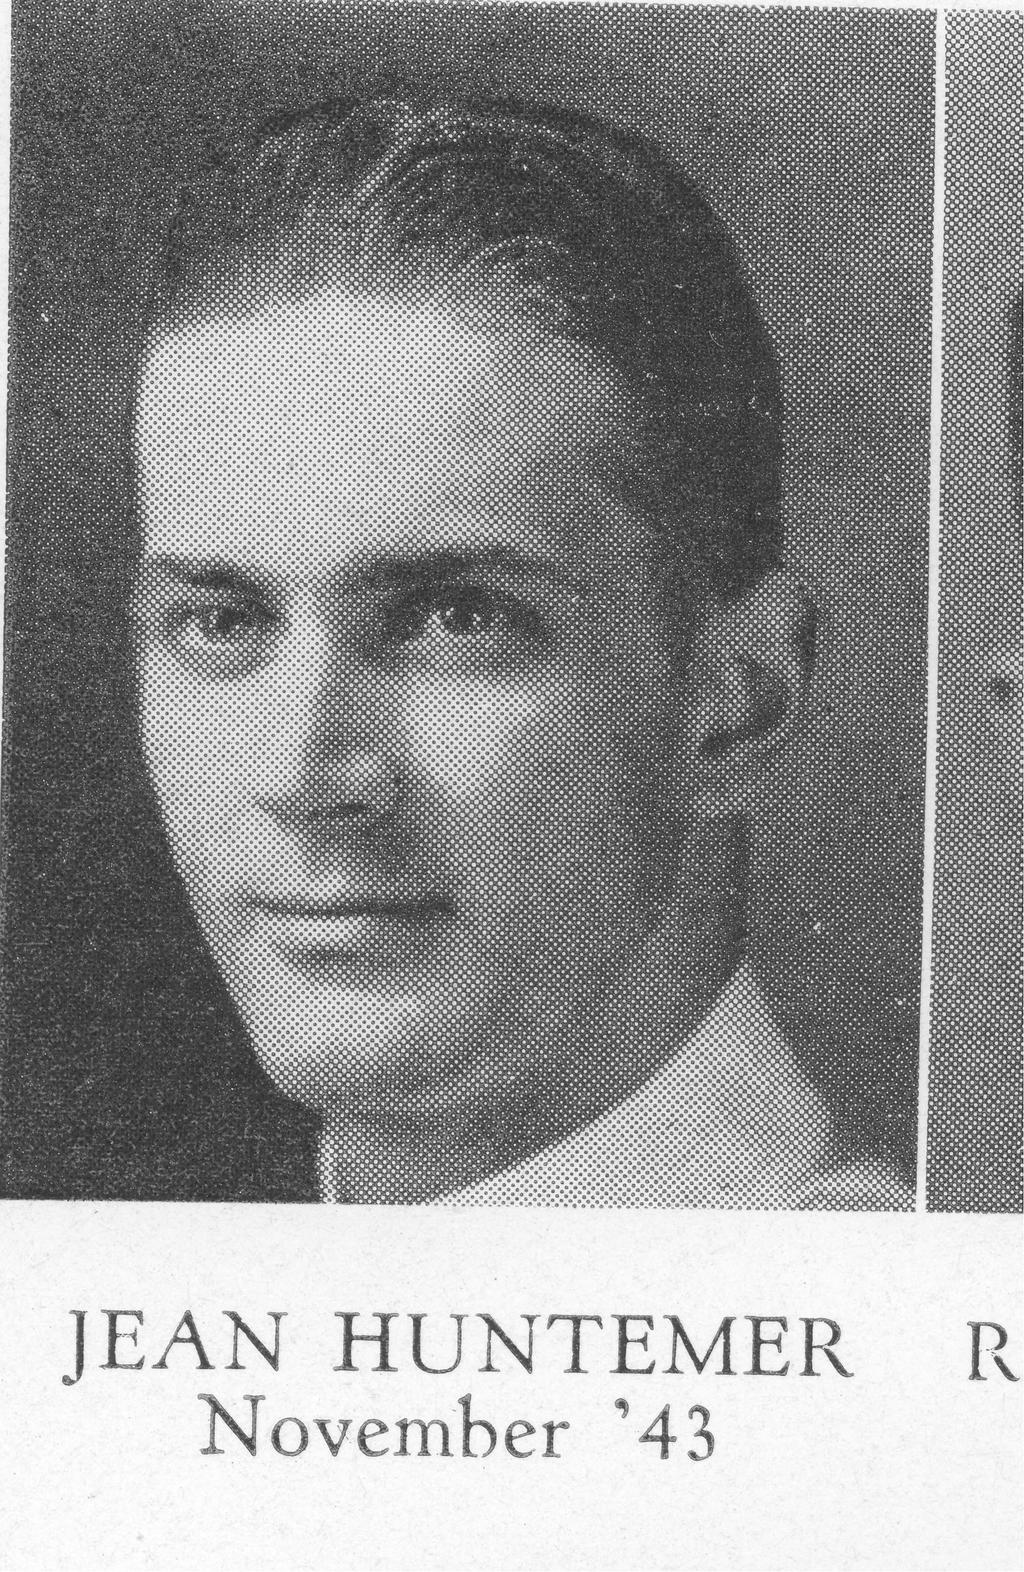 ne 1942 he was sent to active duty in the Pacific. On Thanksgiving Day 1942 E.J.